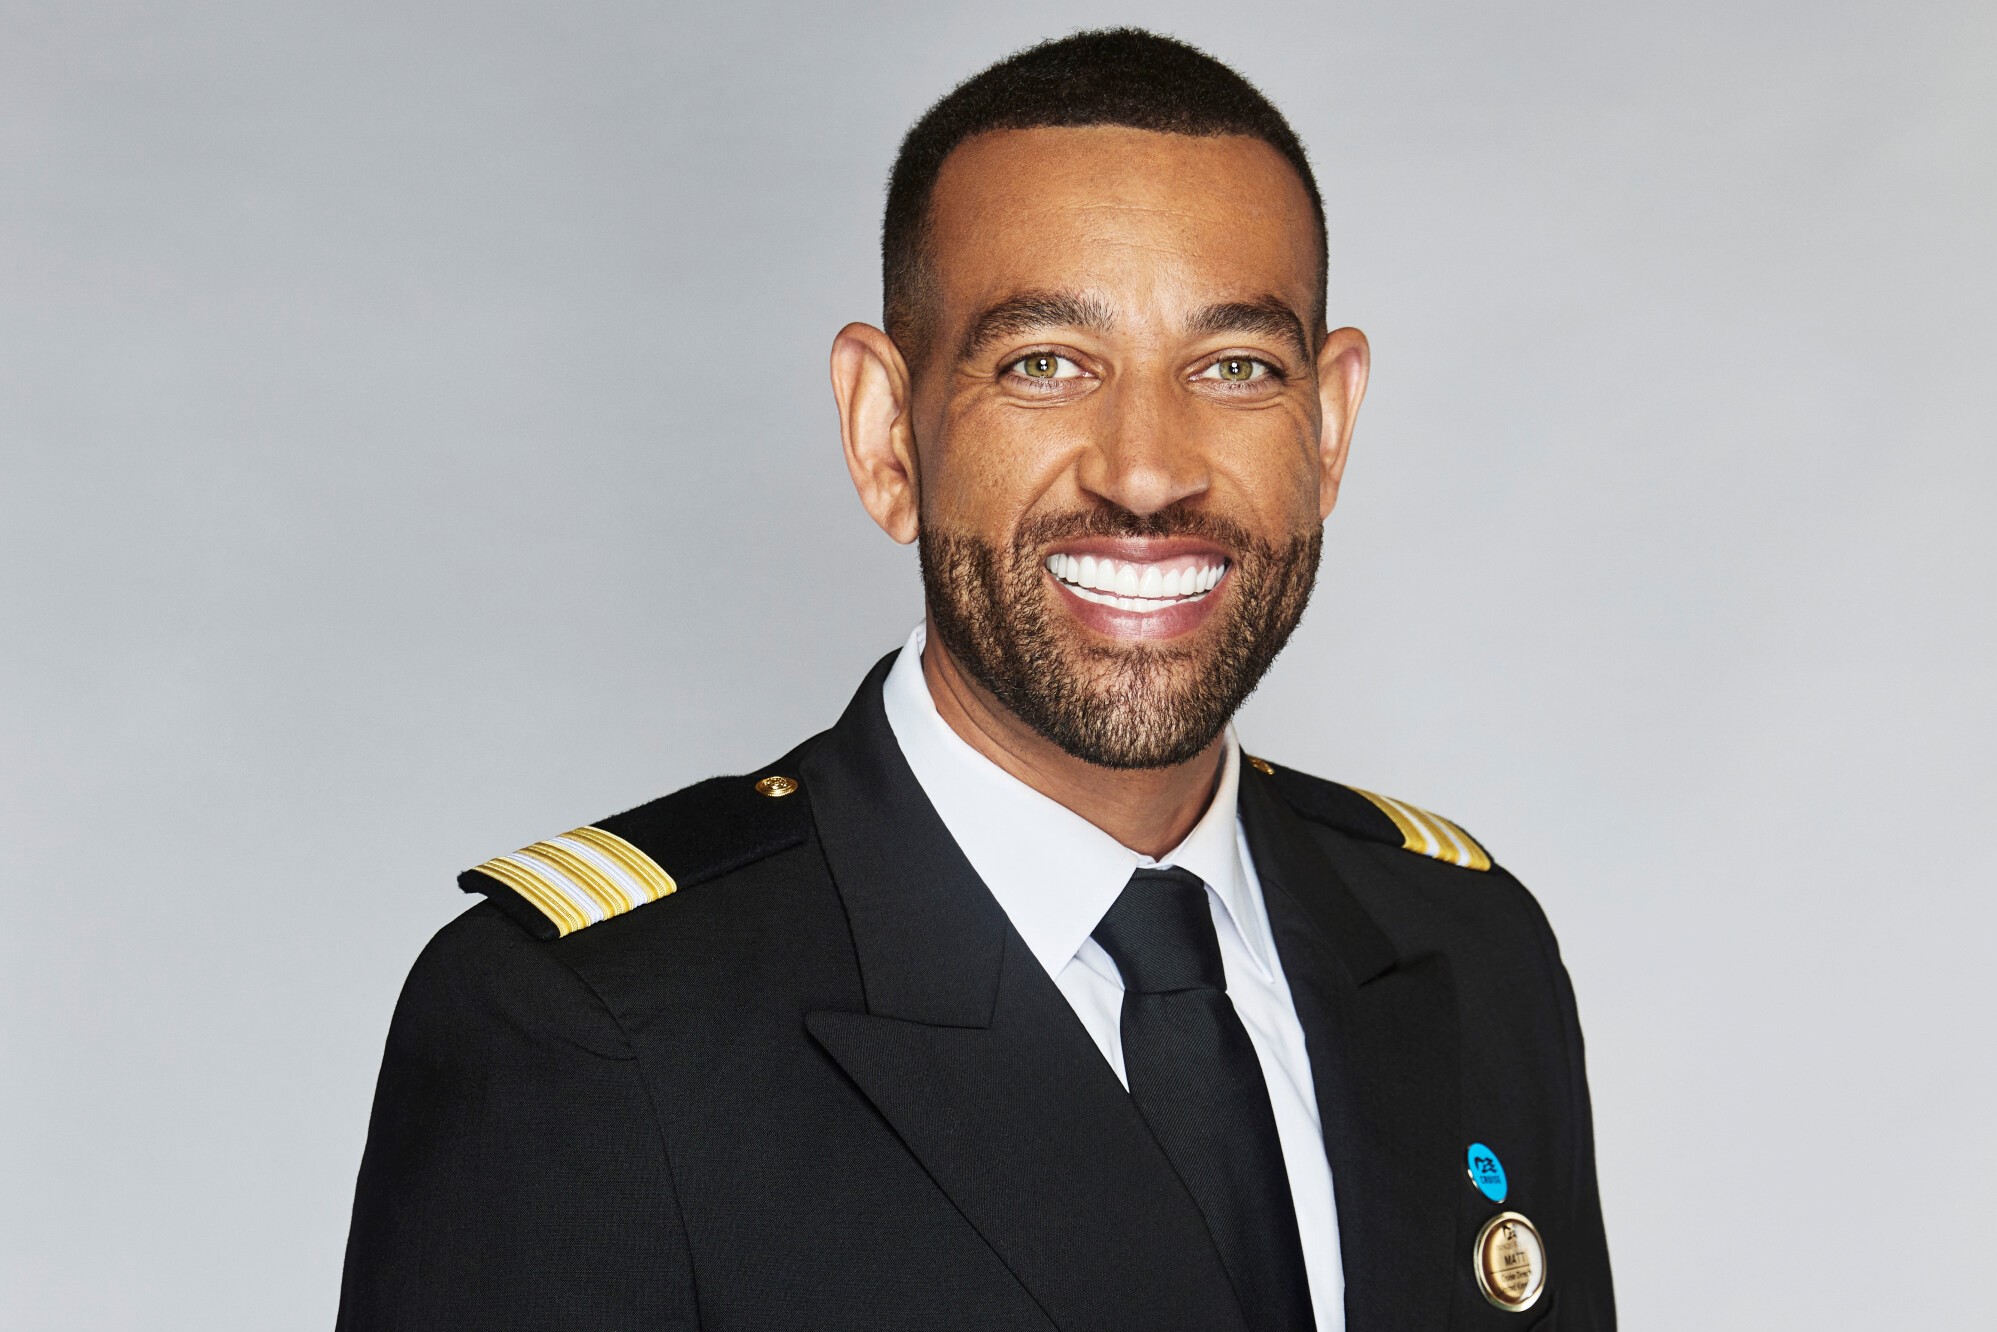 Matt Mitcham, who stars as the cruise director in 'The Real Love Boat' on CBS, wears his black